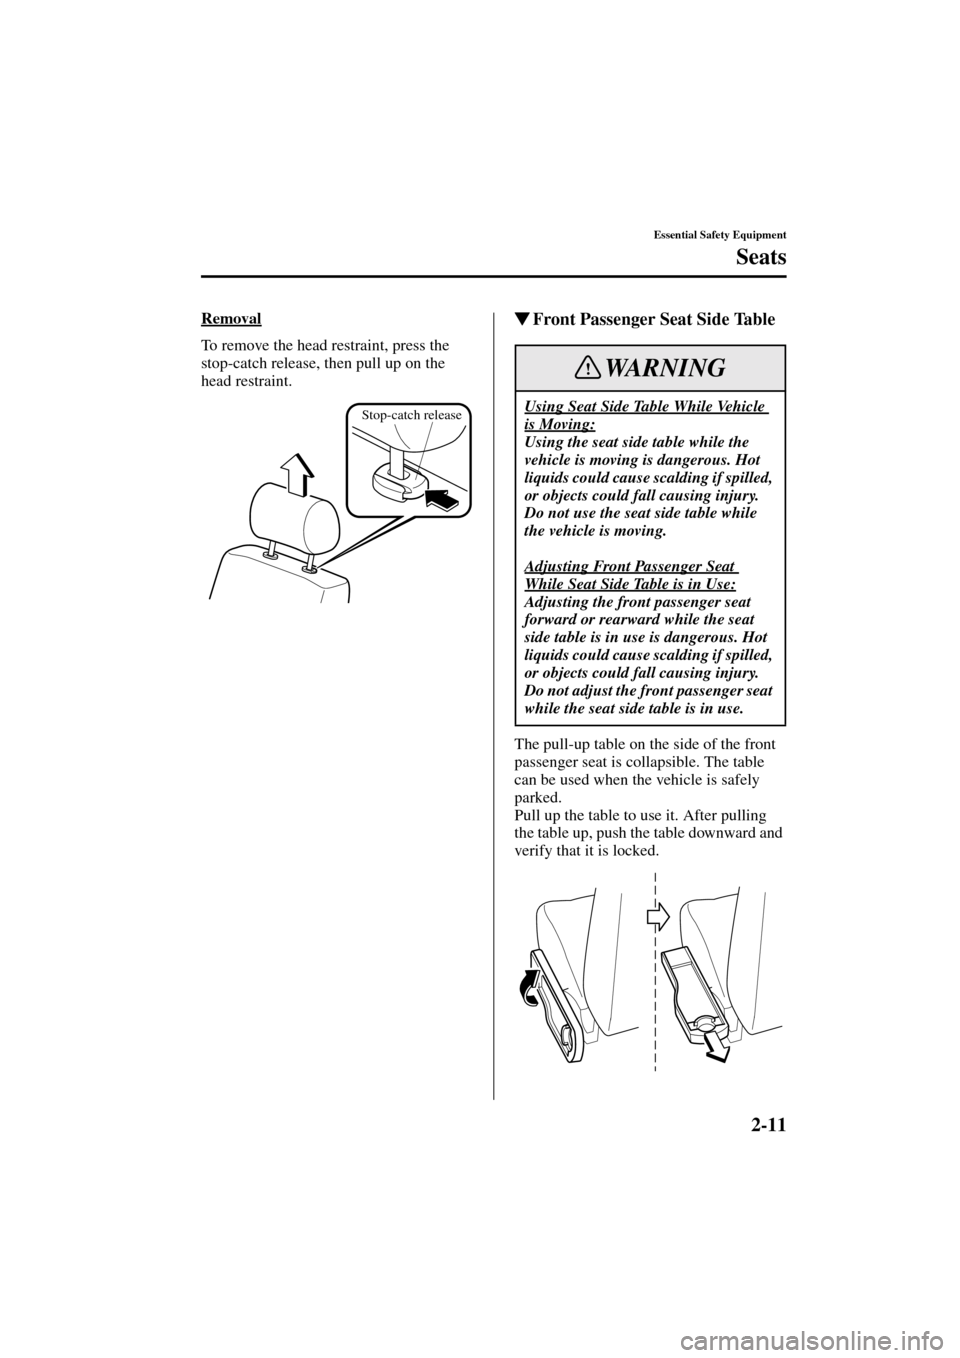 MAZDA MODEL MPV 2004   (in English) User Guide 2-11
Essential Safety Equipment
Seats
Form No. 8S06-EA-03H
Removal
To remove the head restraint, press the 
stop-catch release, then pull up on the 
head restraint.
Front Passenger Seat Side Table
Th